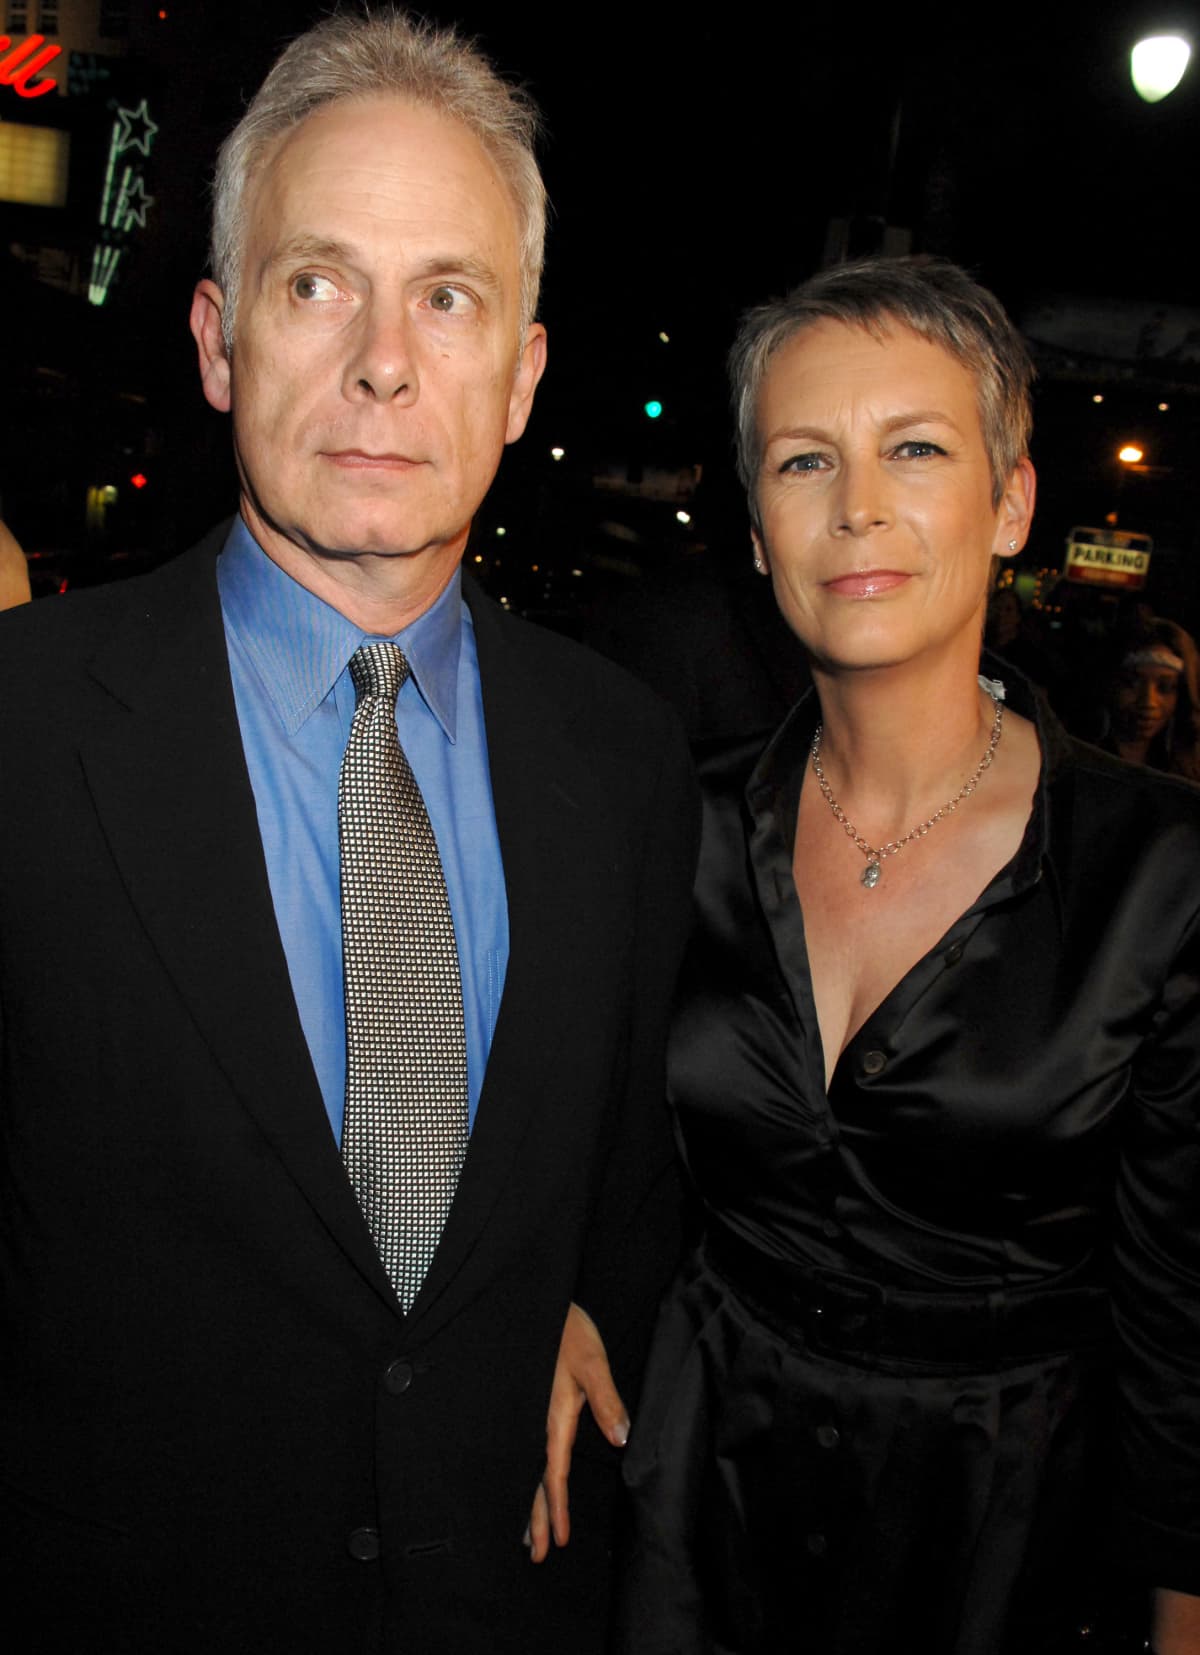 Christopher Guest and wife Jamie Lee Curtis during The 76th Annual Academy Awards - Arrivals by Jeff Kravitz at Kodak Theatre in Hollywood, California, United States. (Photo by Jeff Kravitz/FilmMagic, Inc)